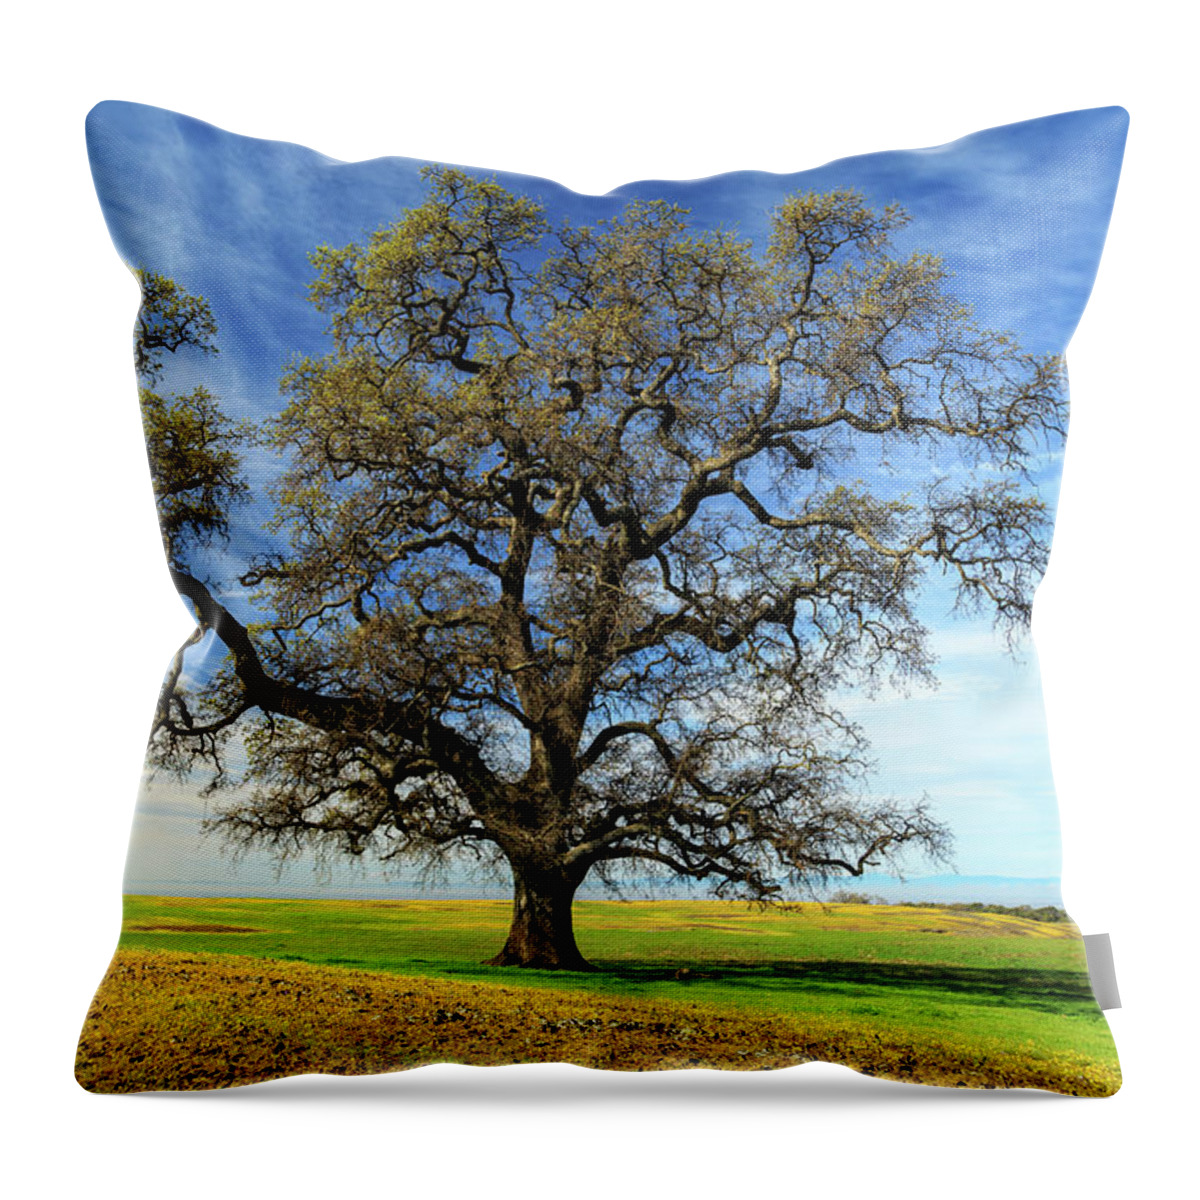 Oak Throw Pillow featuring the photograph An Oak In Spring by James Eddy